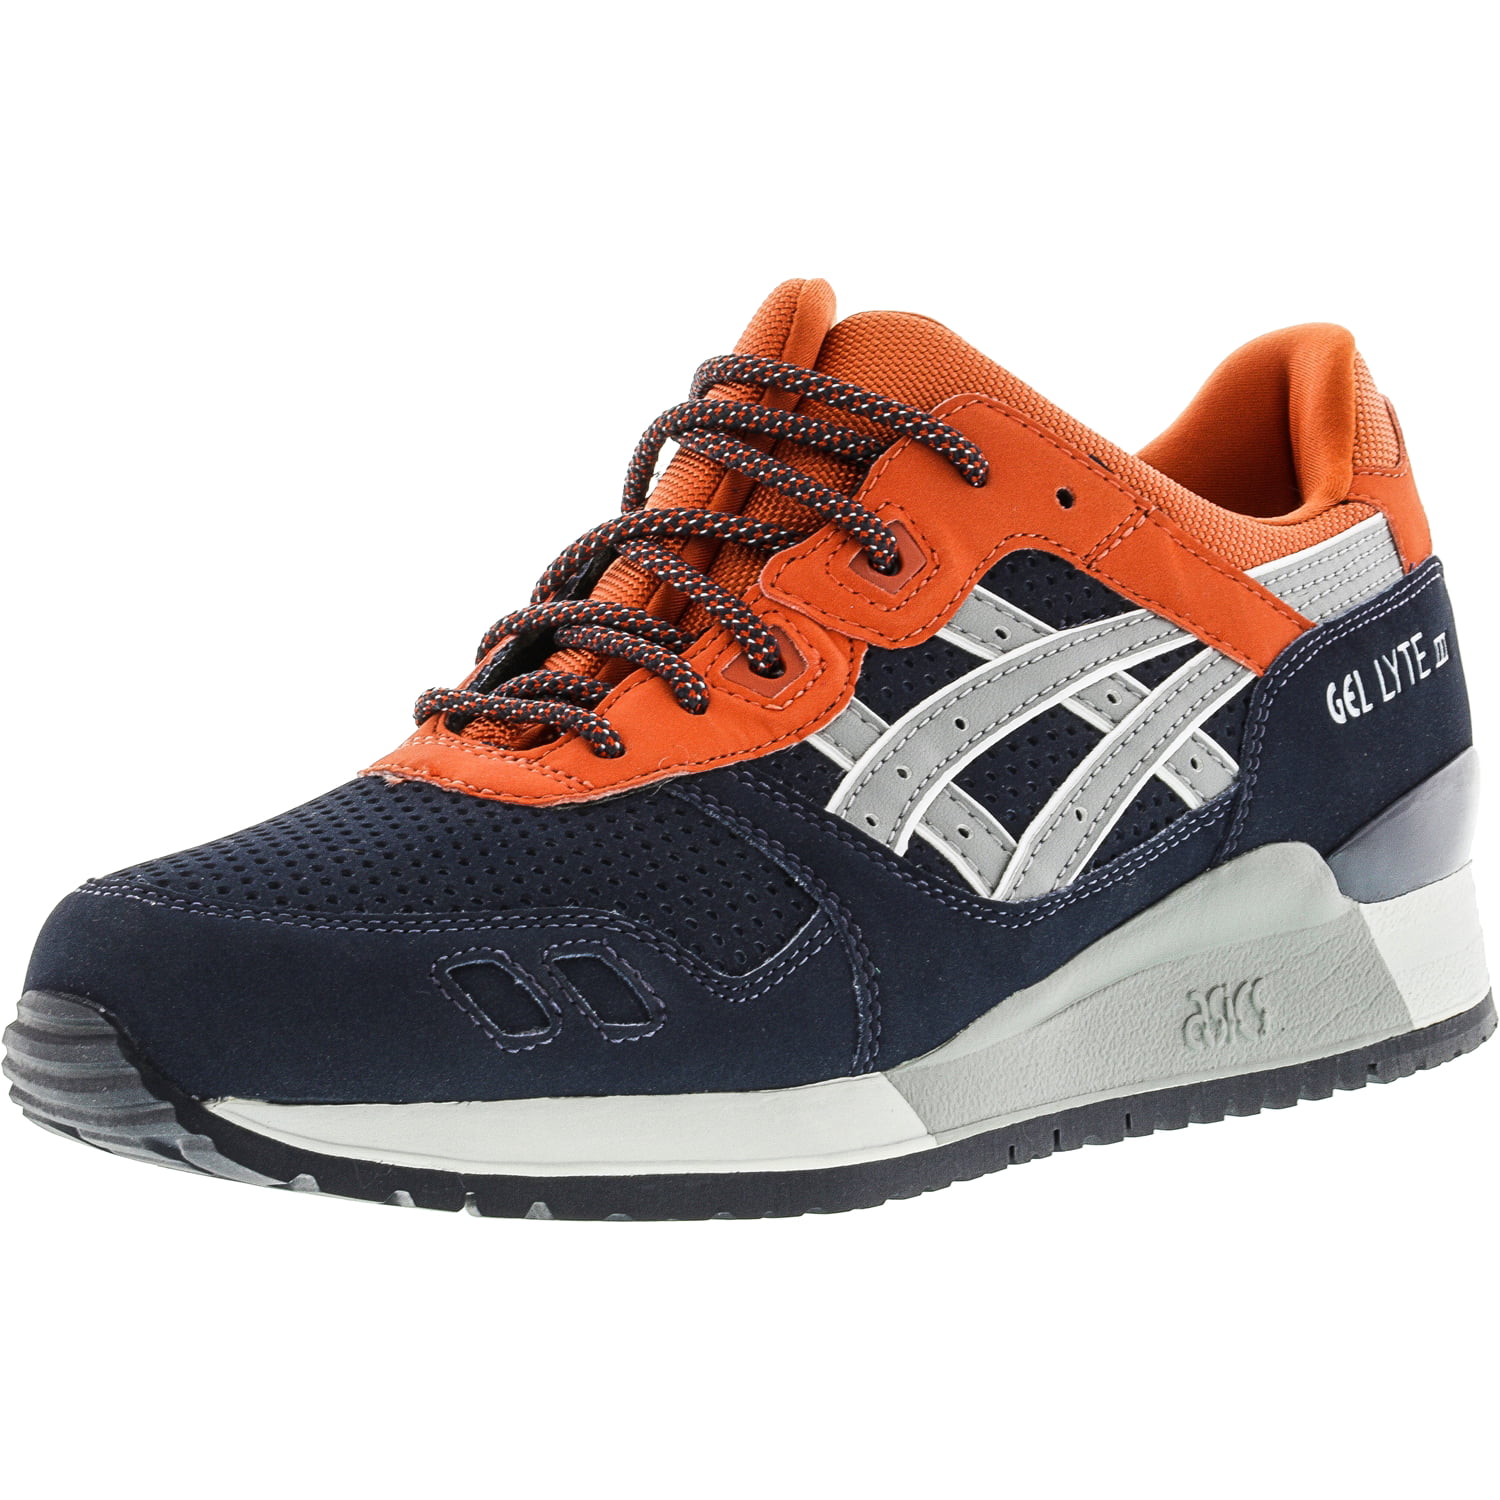 ASICS Men's Gel-Lyte Iii Indian Ink / Mid Grey Ankle-High Leather ...